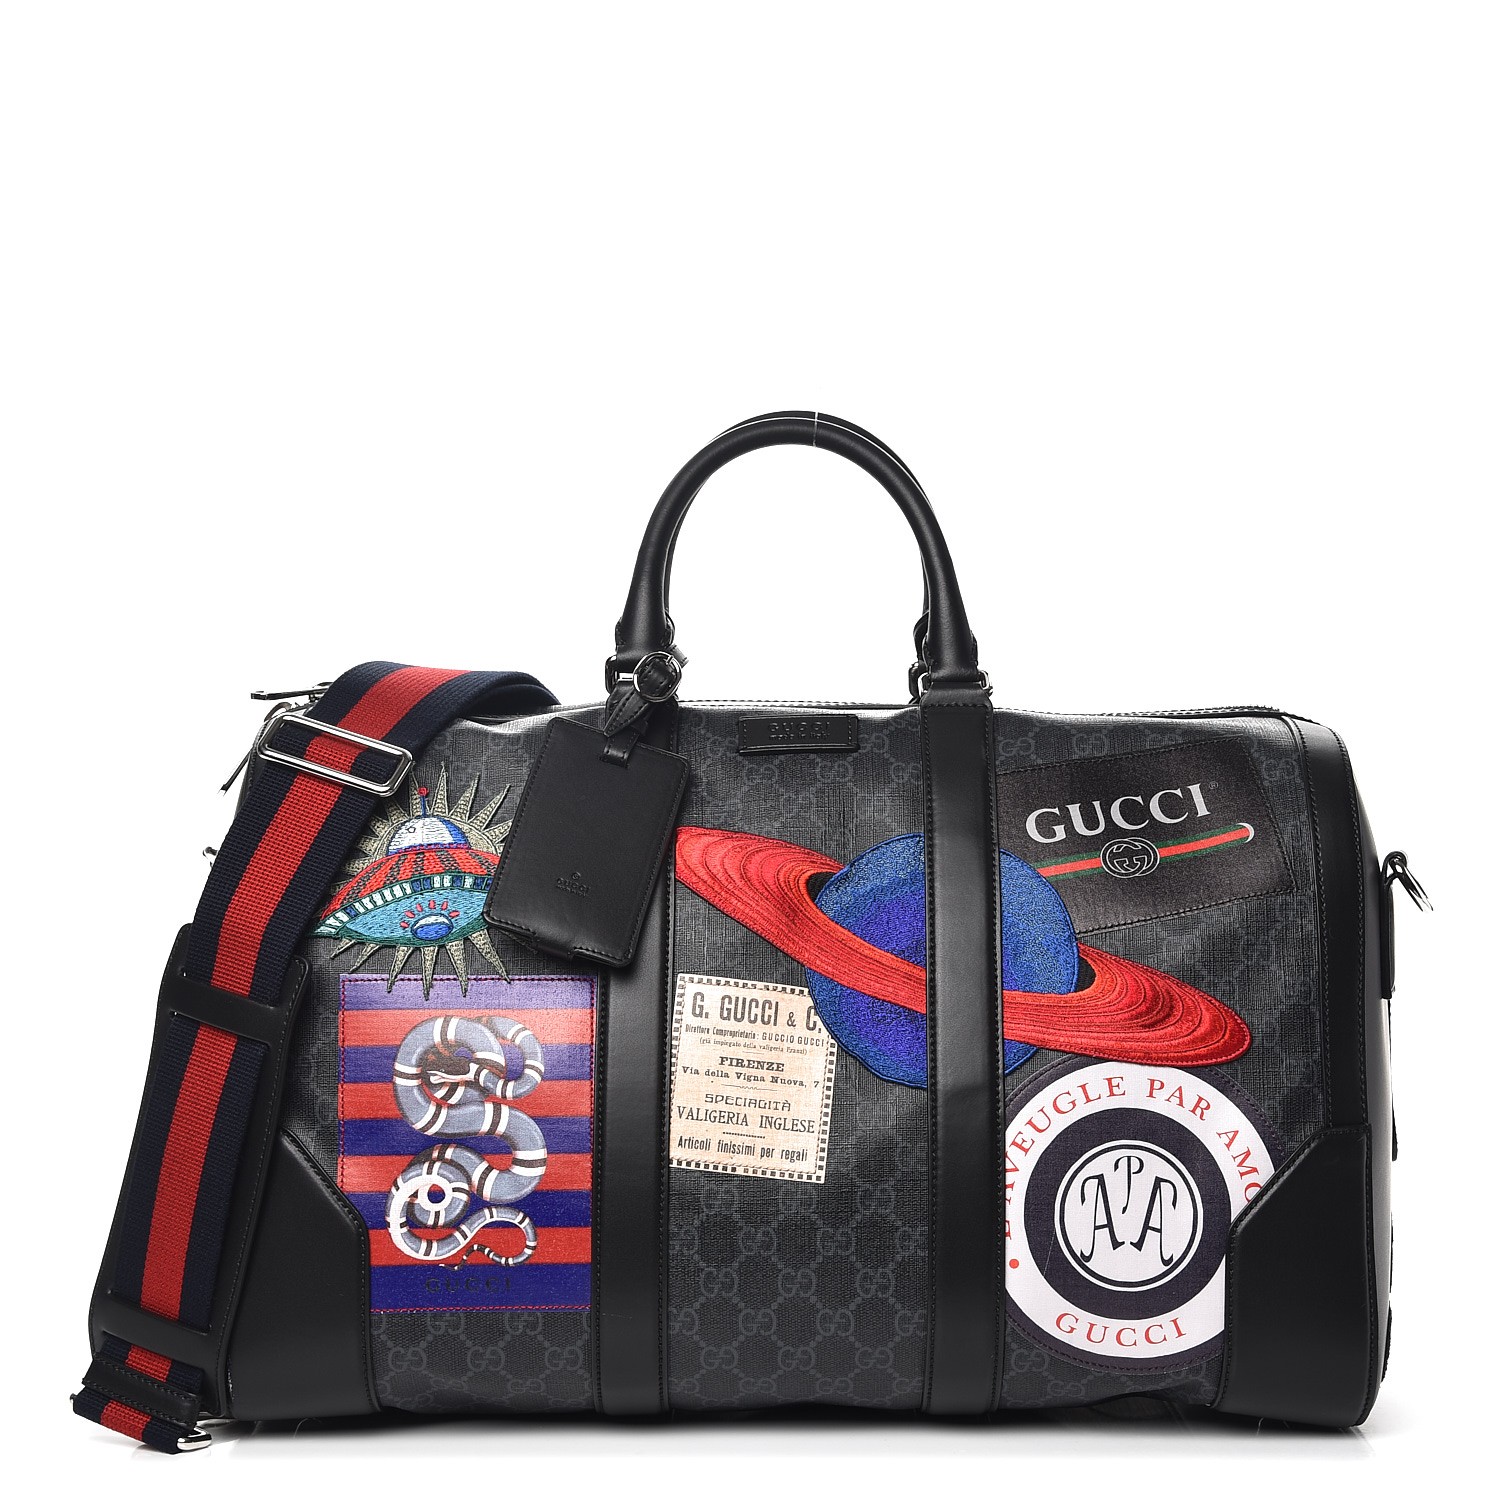 GUCCI GG Supreme Monogram Night Courrier Carry On Duffle Black 239441